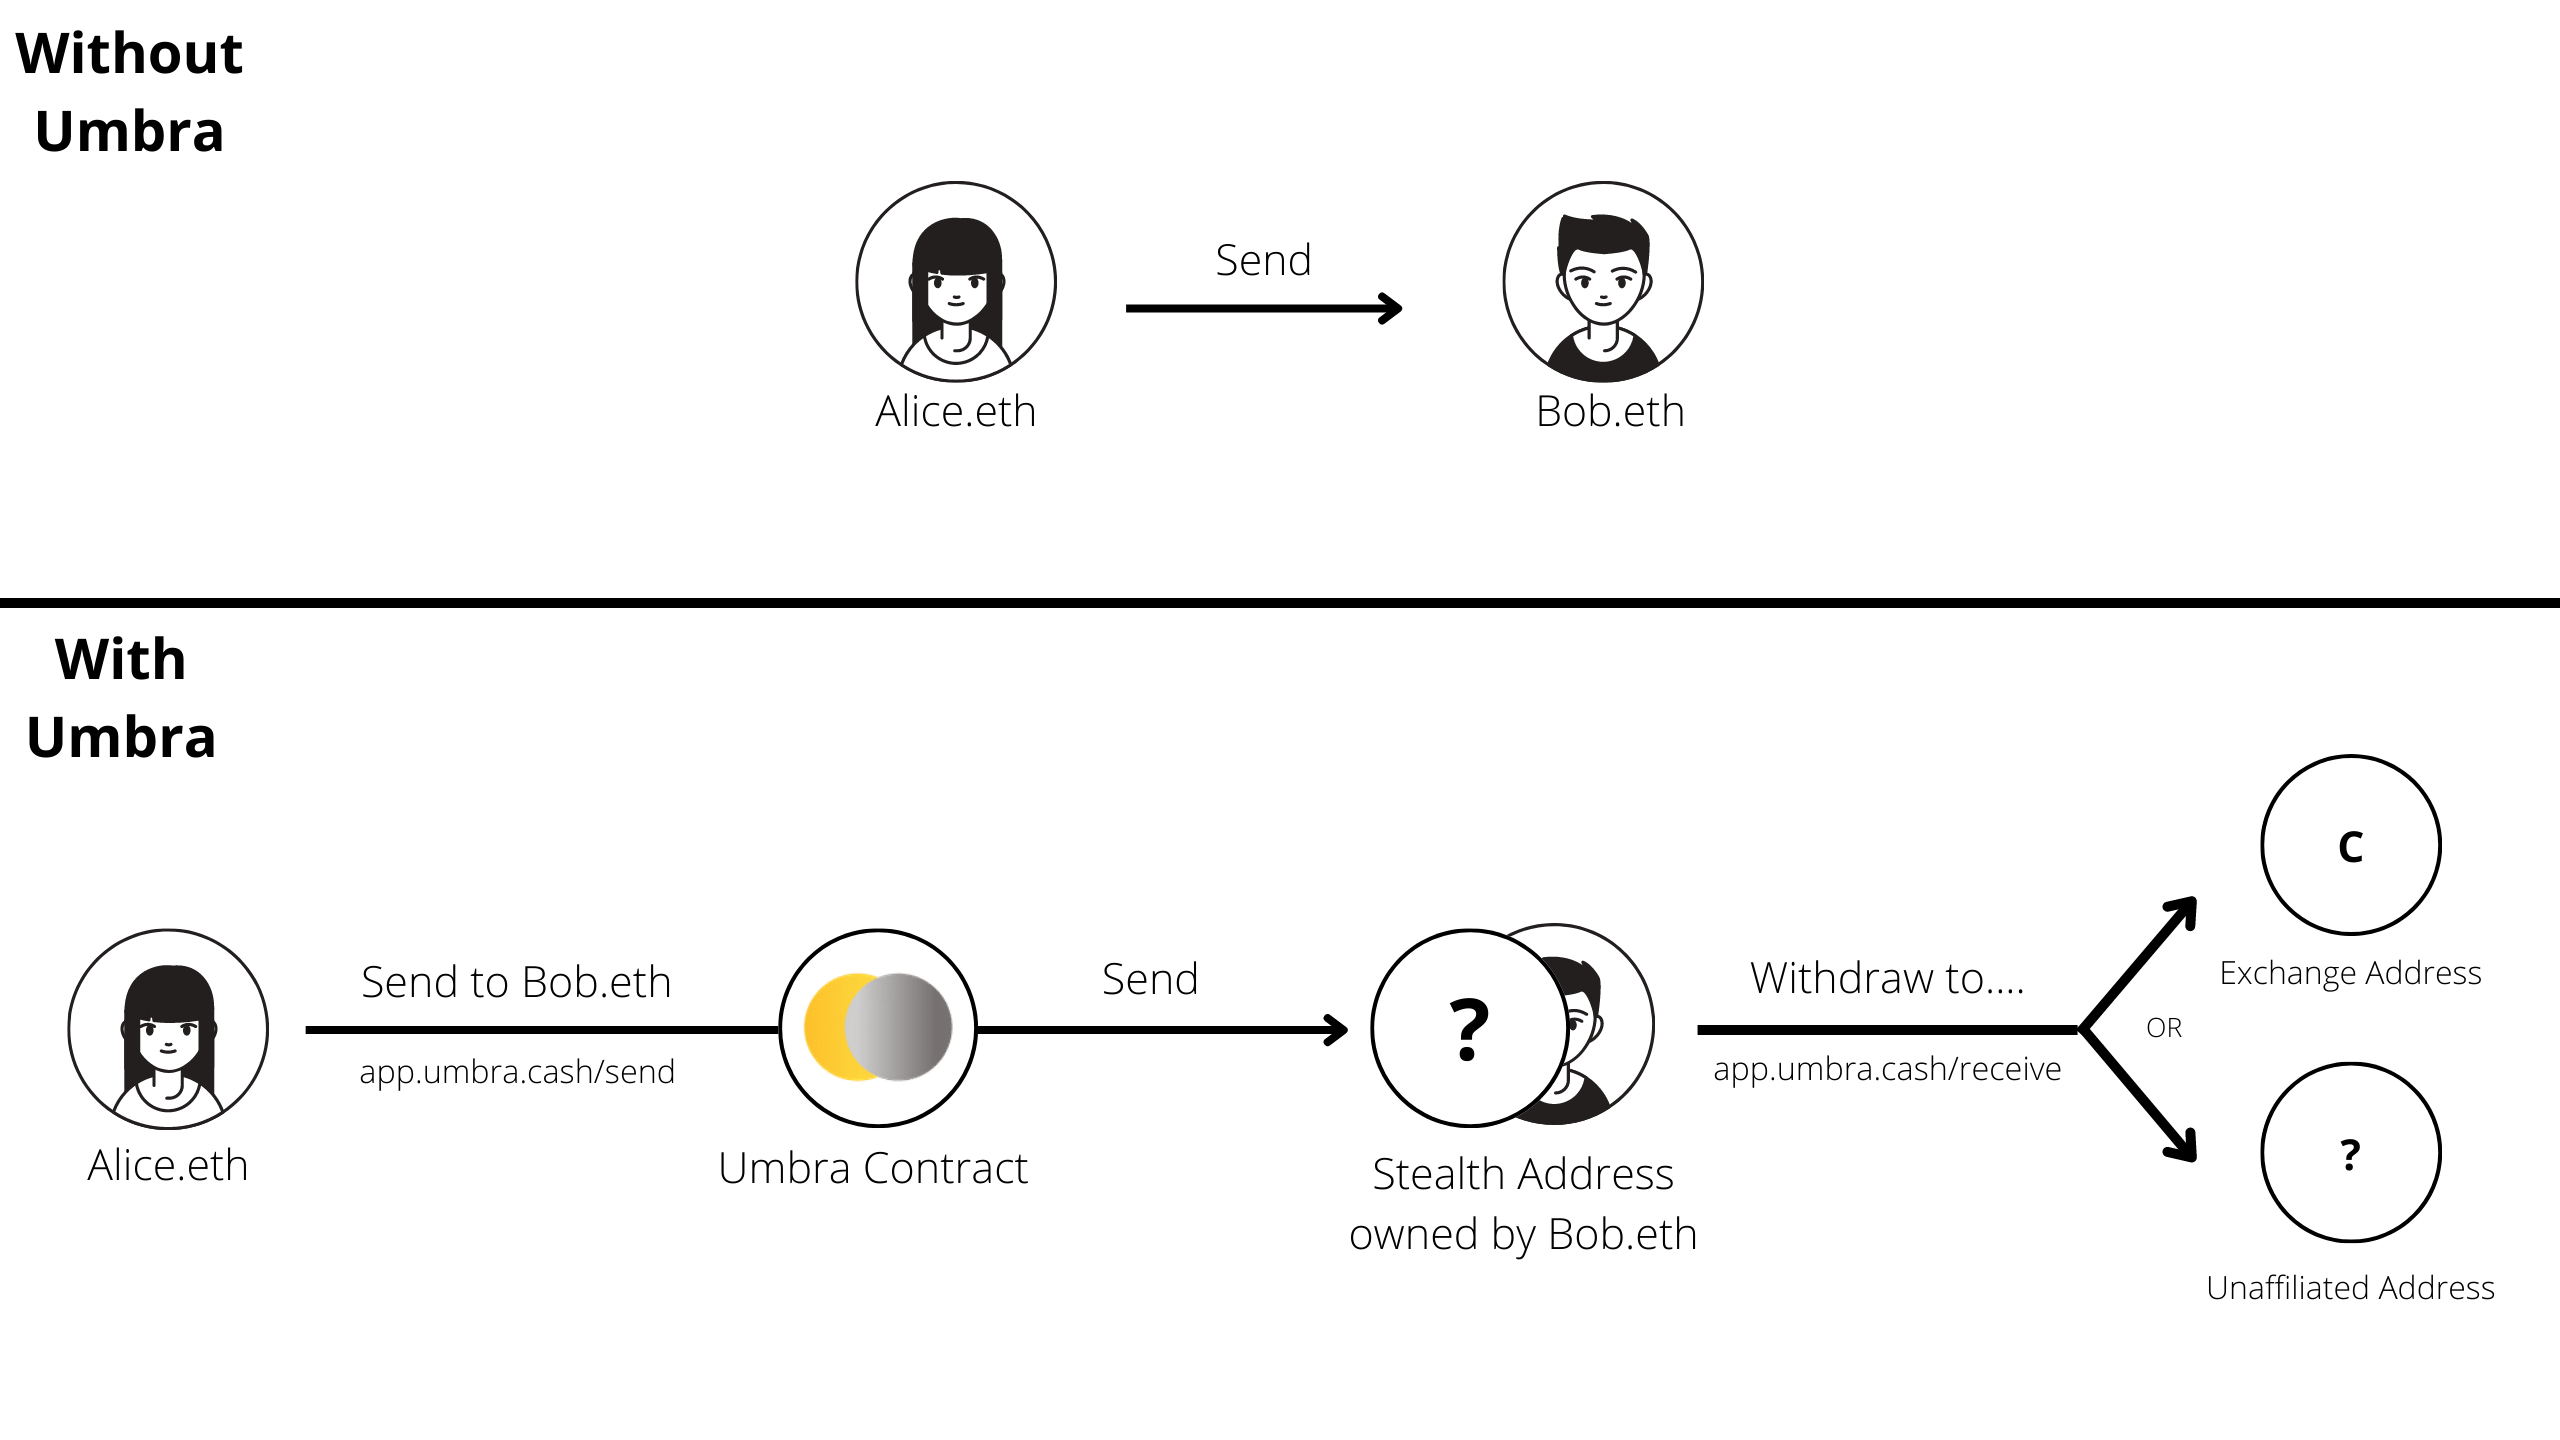 Diagram showing how Umbra provides privacy.